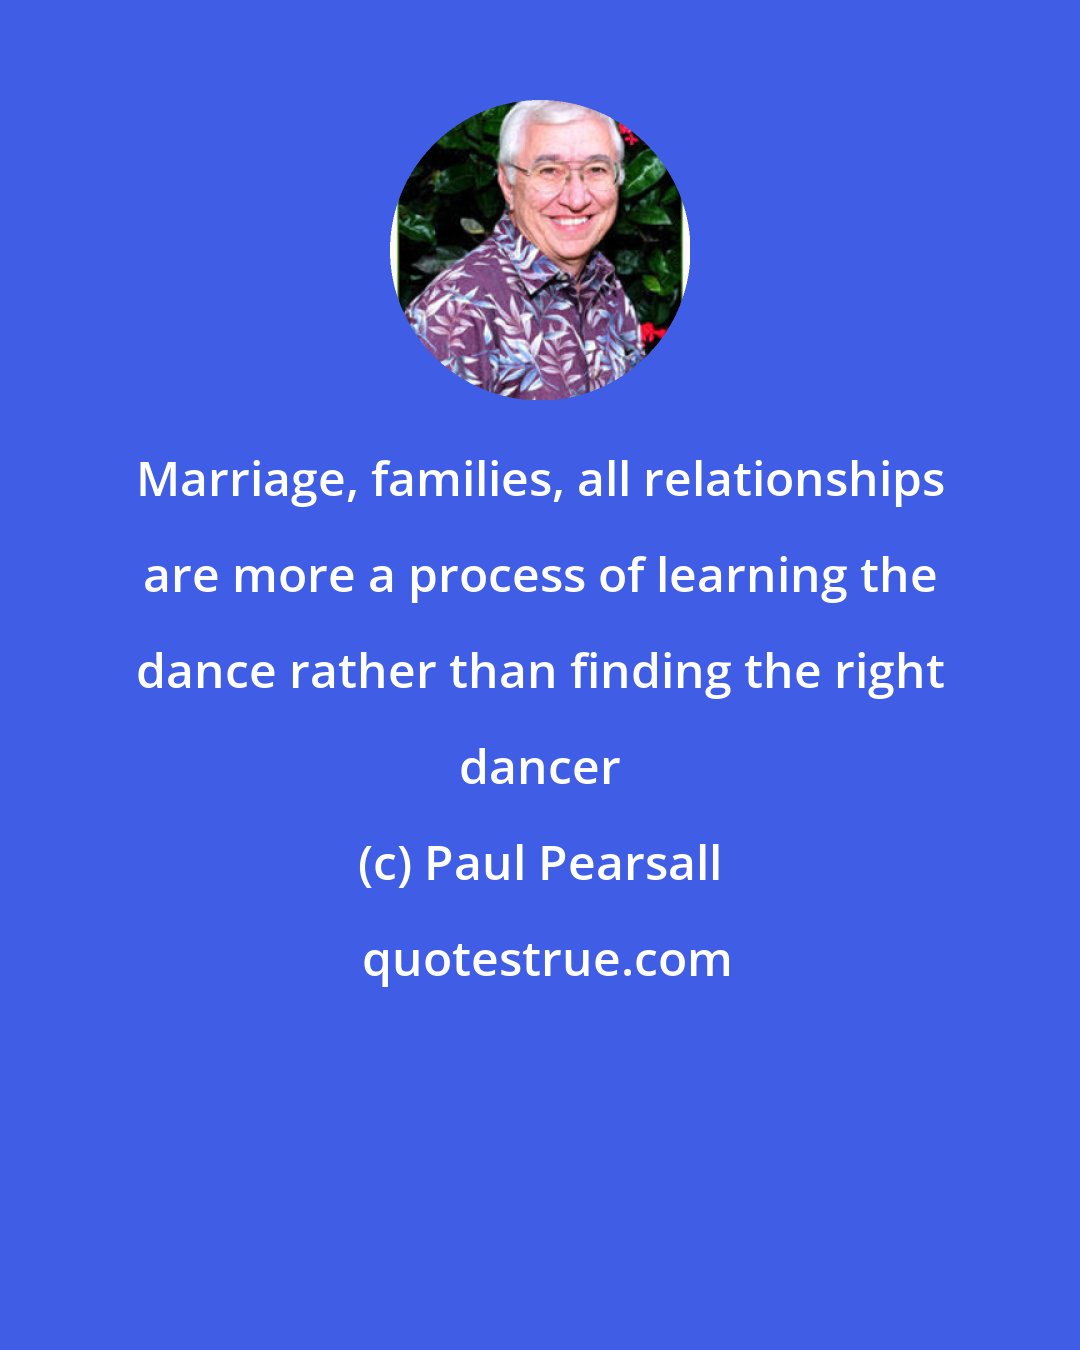 Paul Pearsall: Marriage, families, all relationships are more a process of learning the dance rather than finding the right dancer